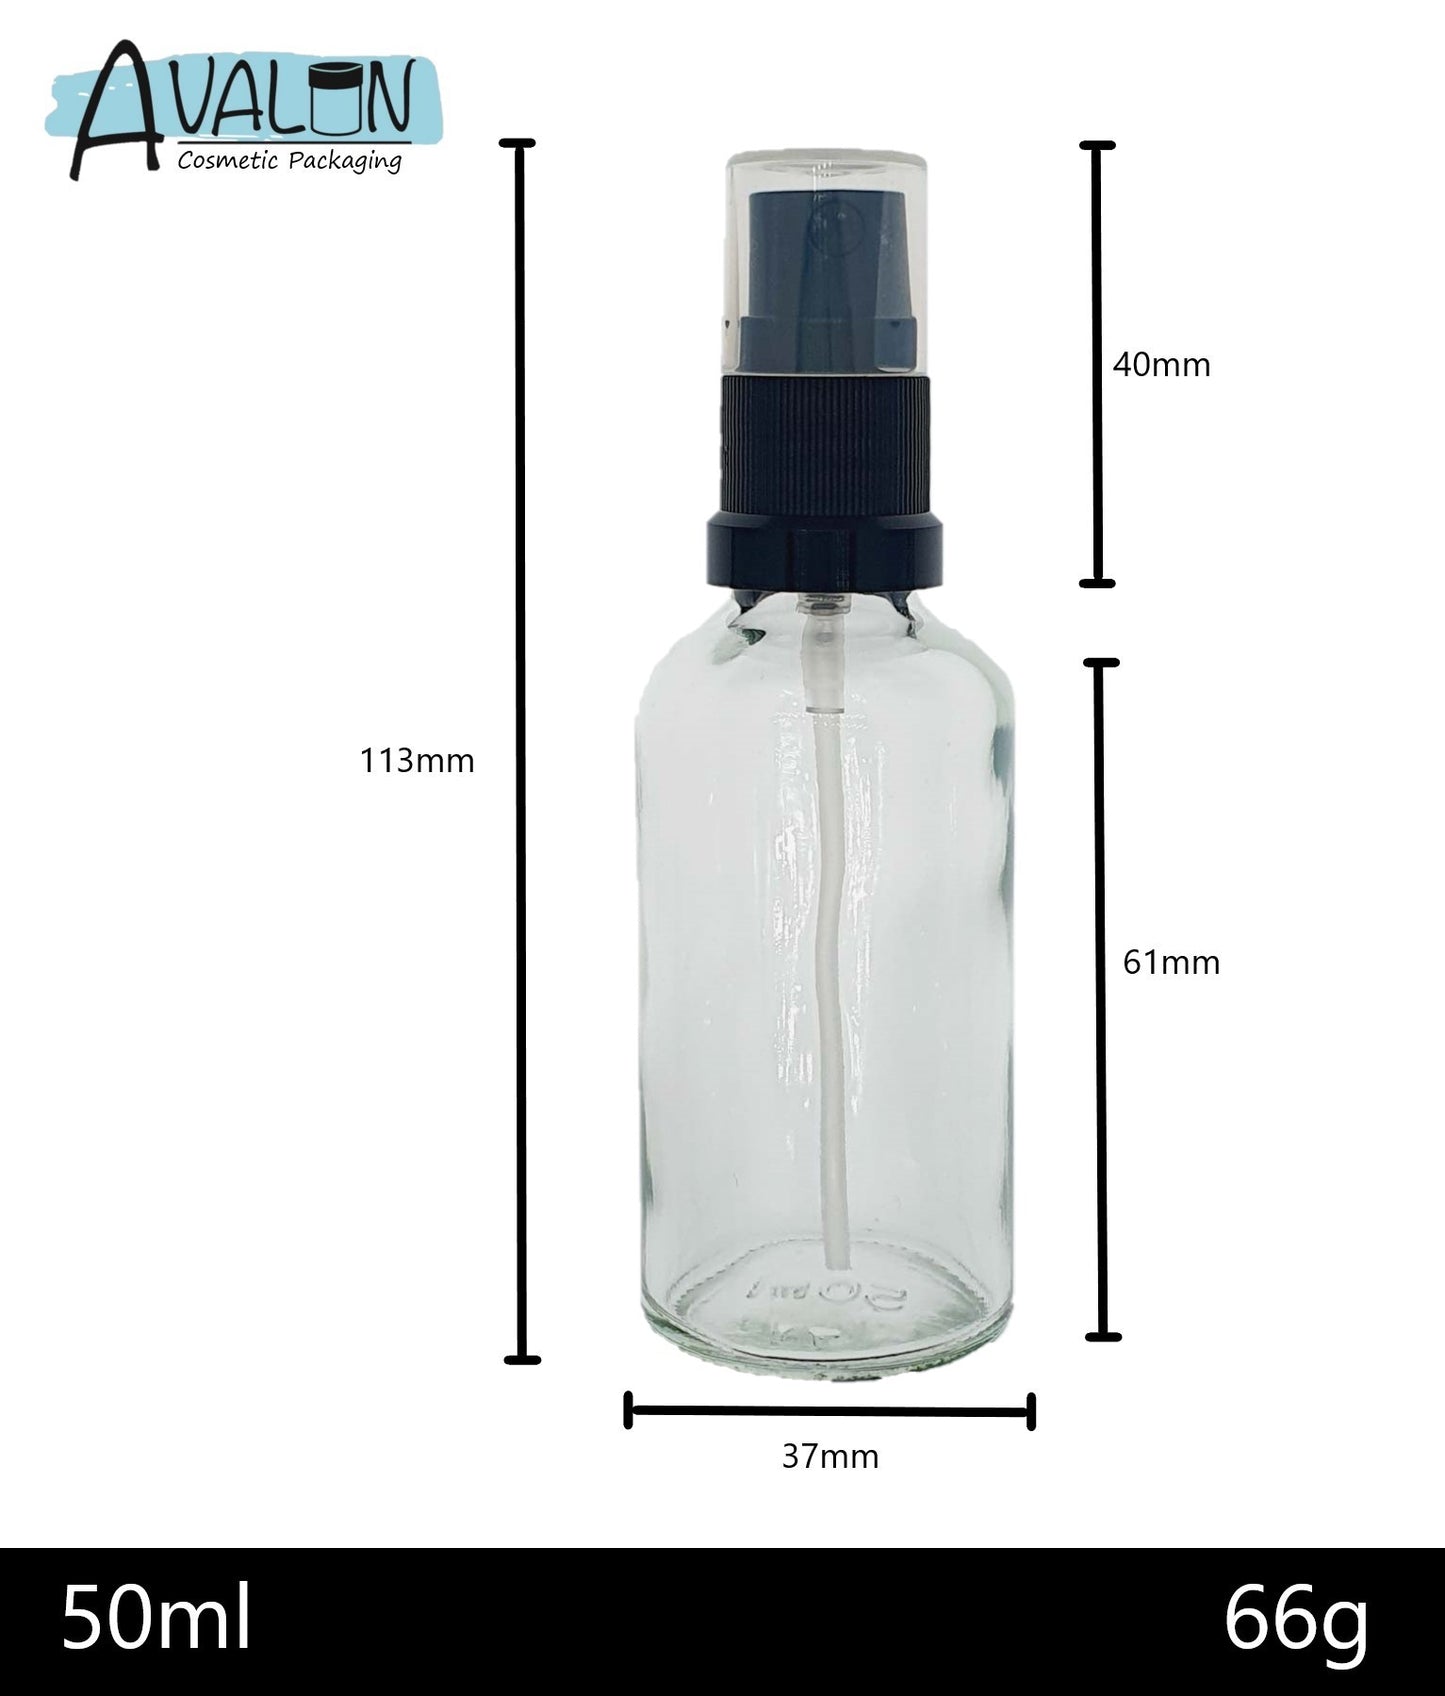 50ml Clear Glass Bottles with Black Atomiser Spray and Clear Overcap